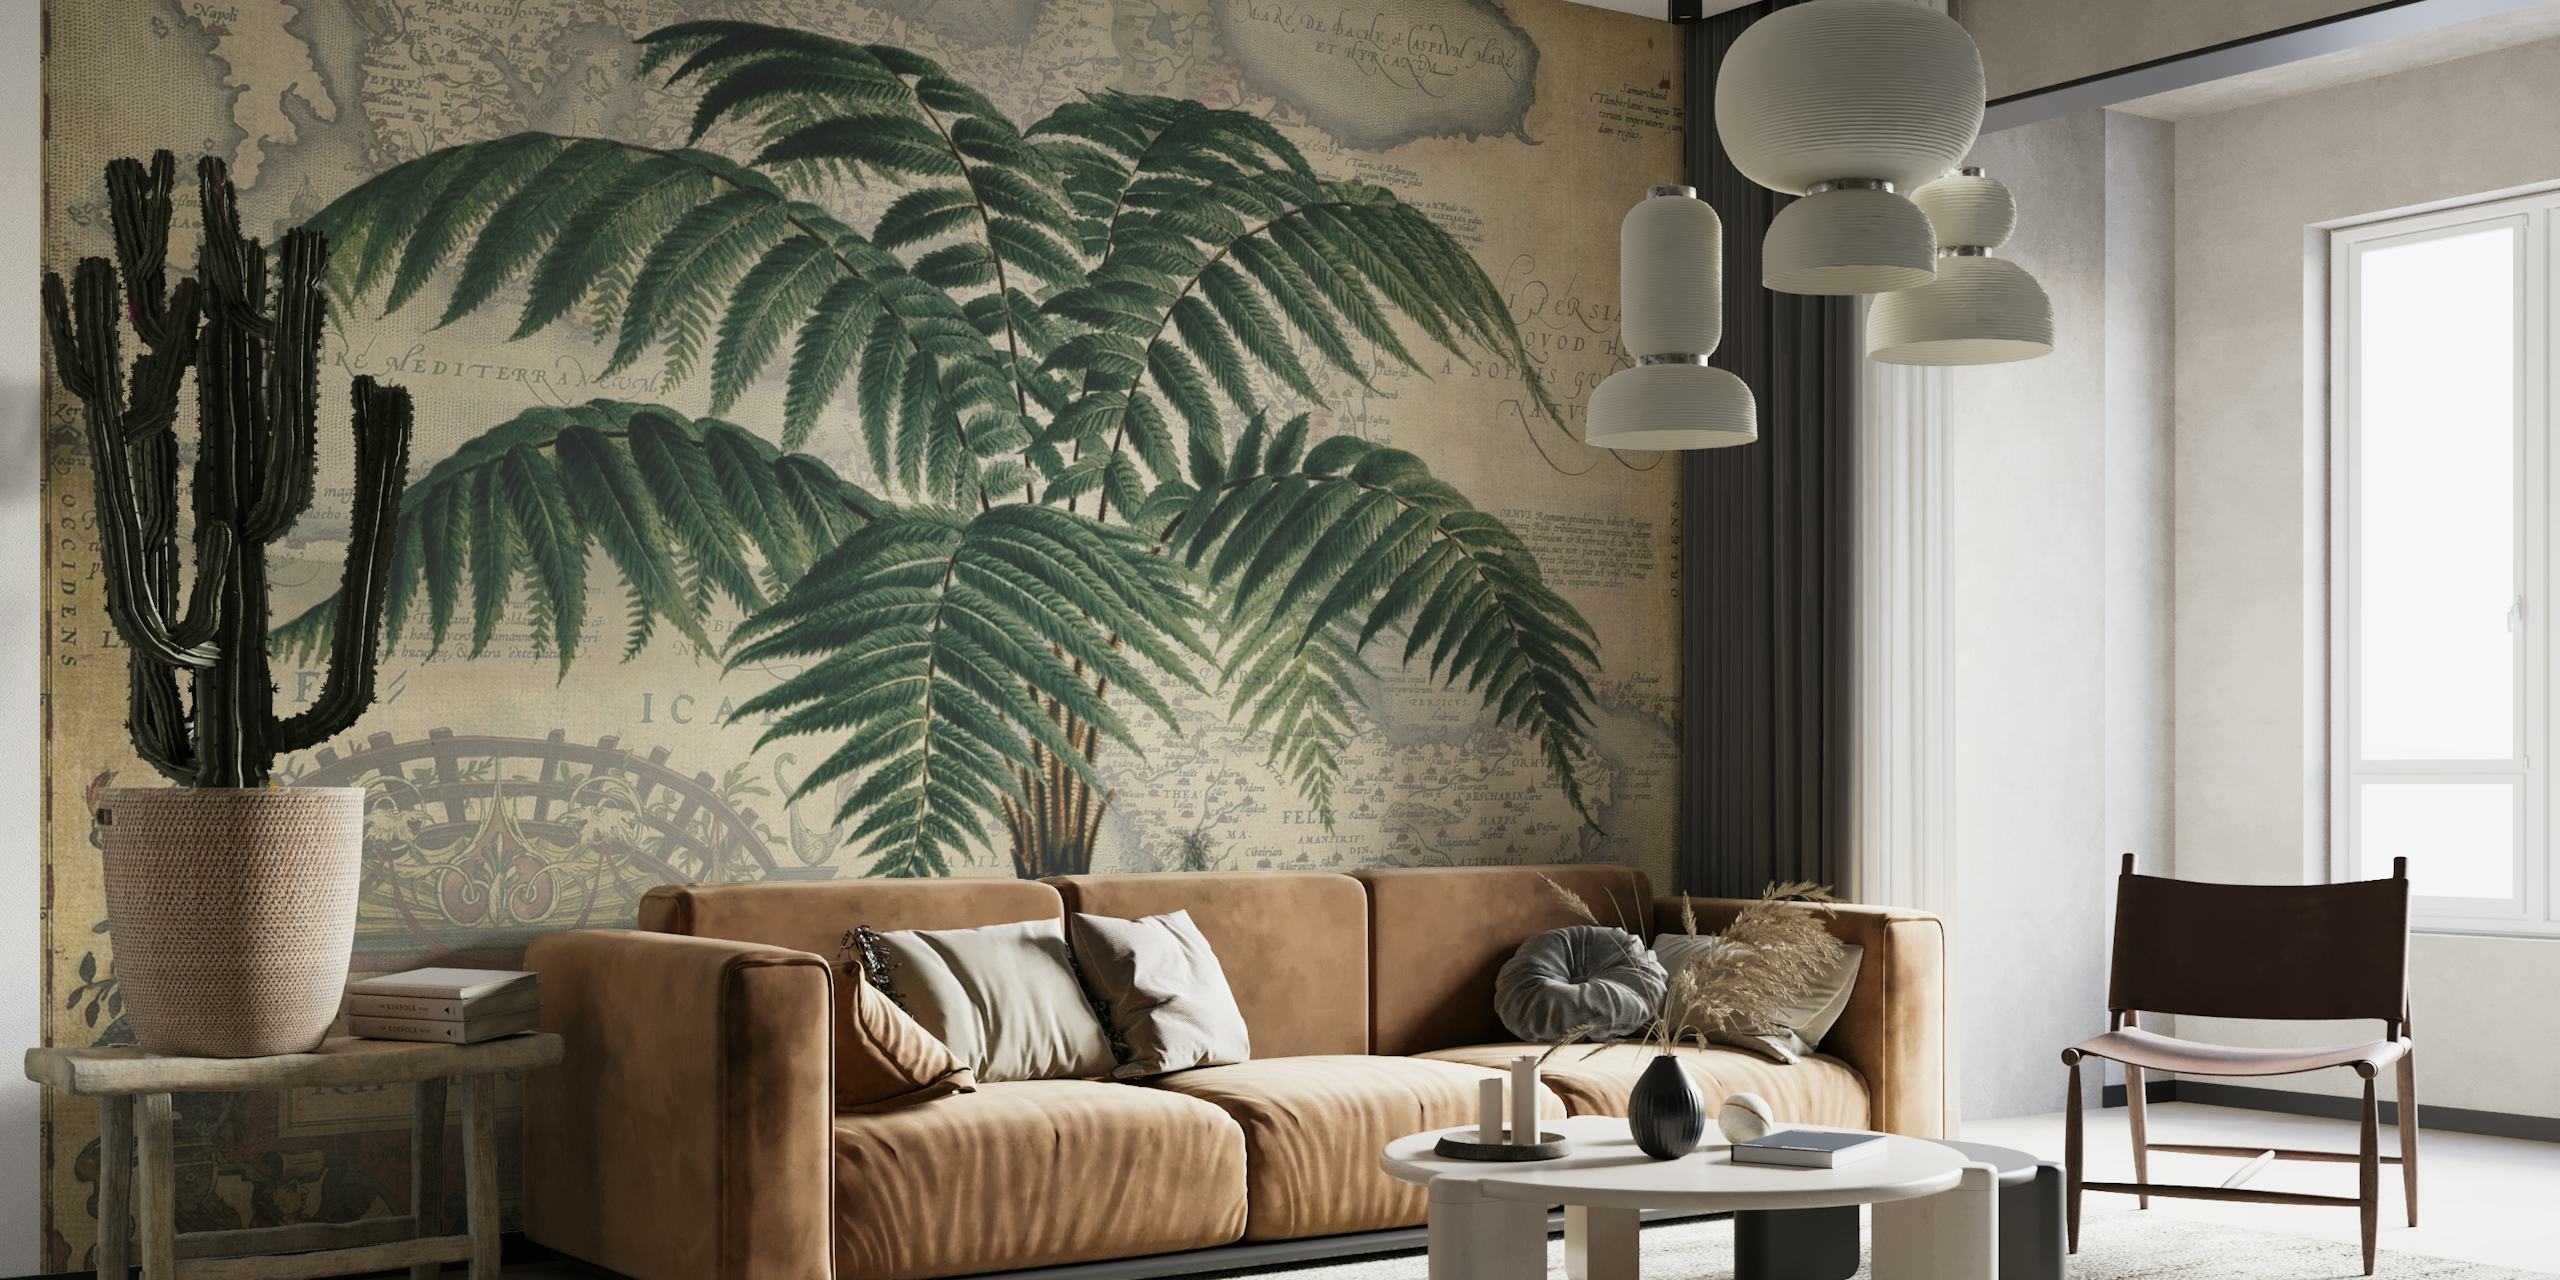 Vintage Dicksonia Chrysotricha fern wall mural with an aged background